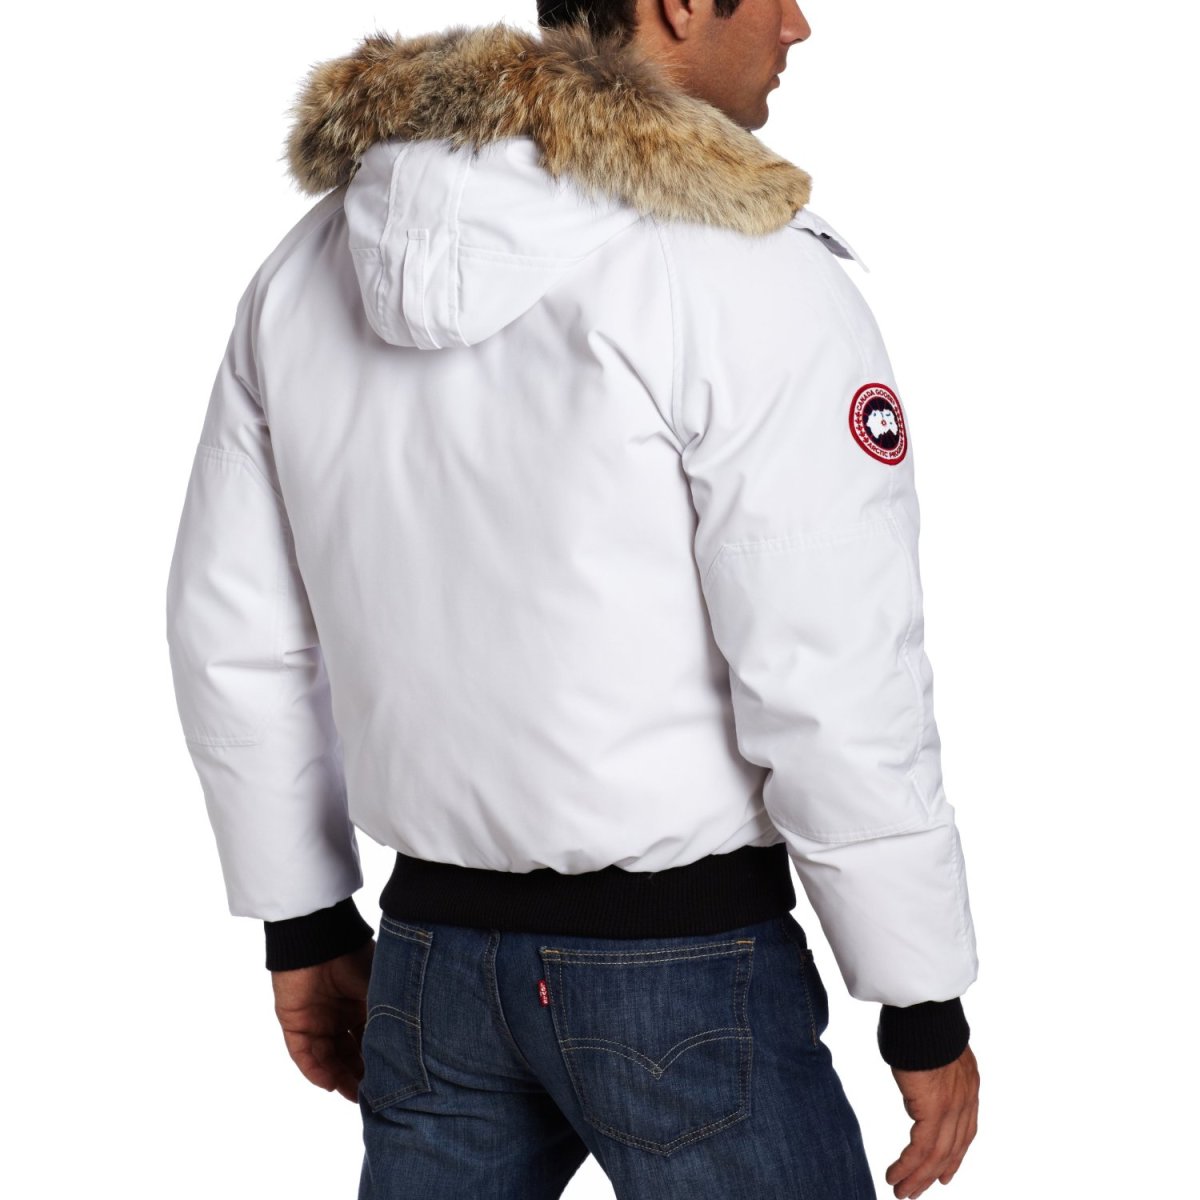 canada goose jacket leaking down